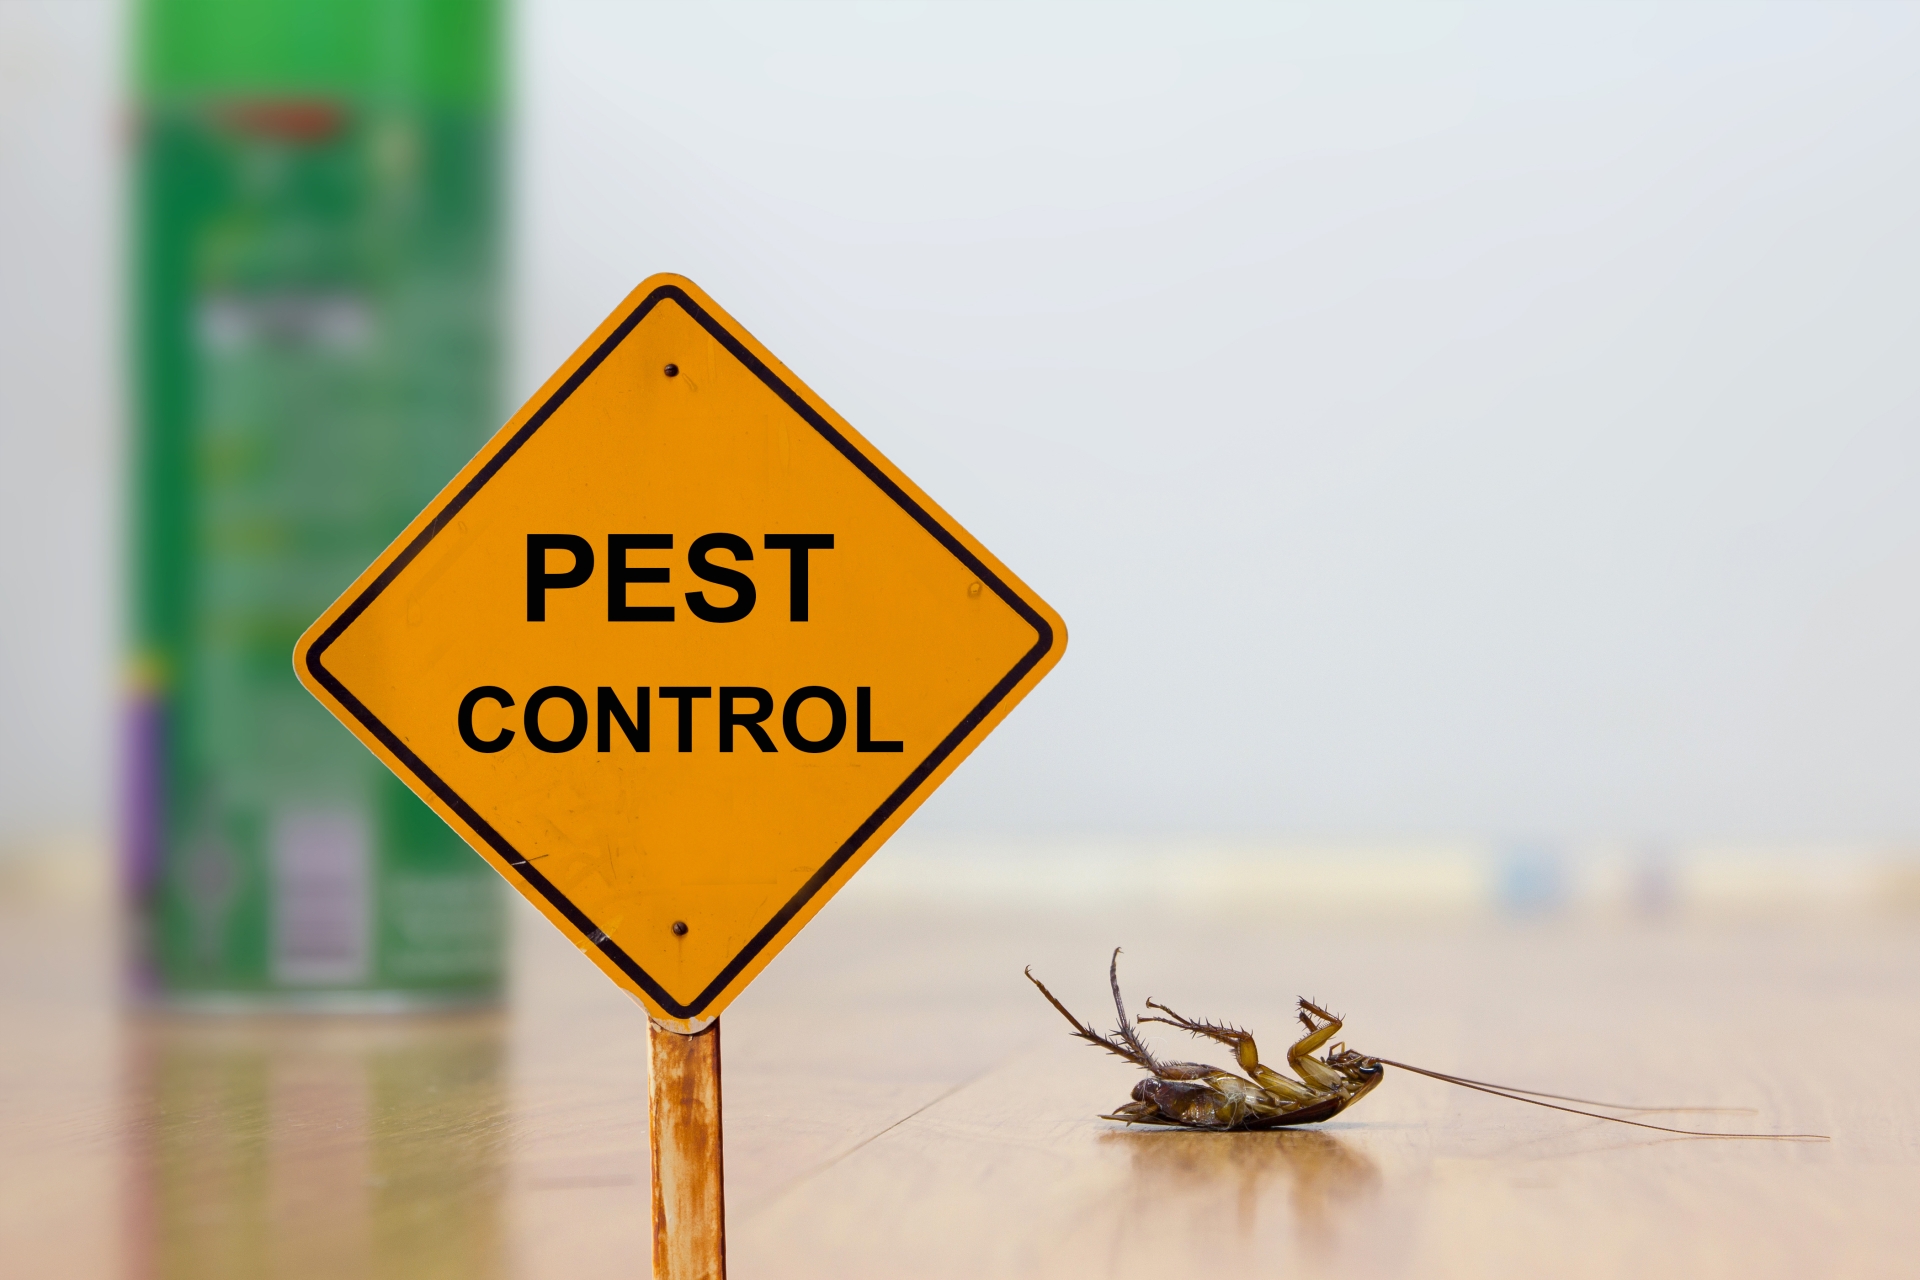 24 Hour Pest Control, Pest Control in Purley, Kenley, CR8. Call Now 020 8166 9746